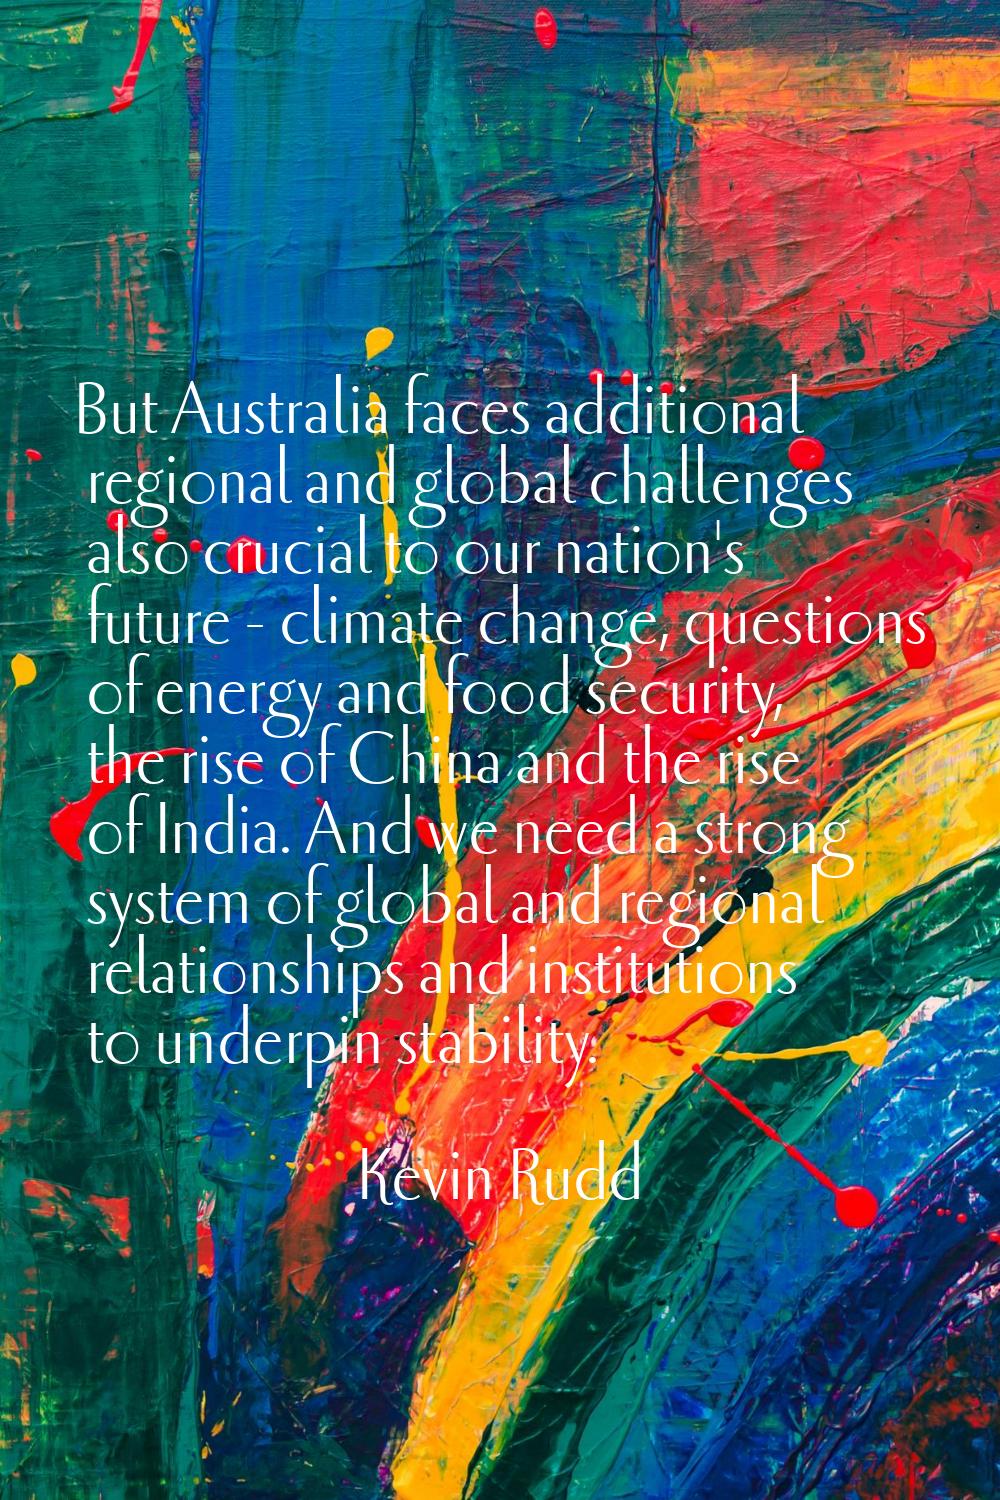 But Australia faces additional regional and global challenges also crucial to our nation's future -